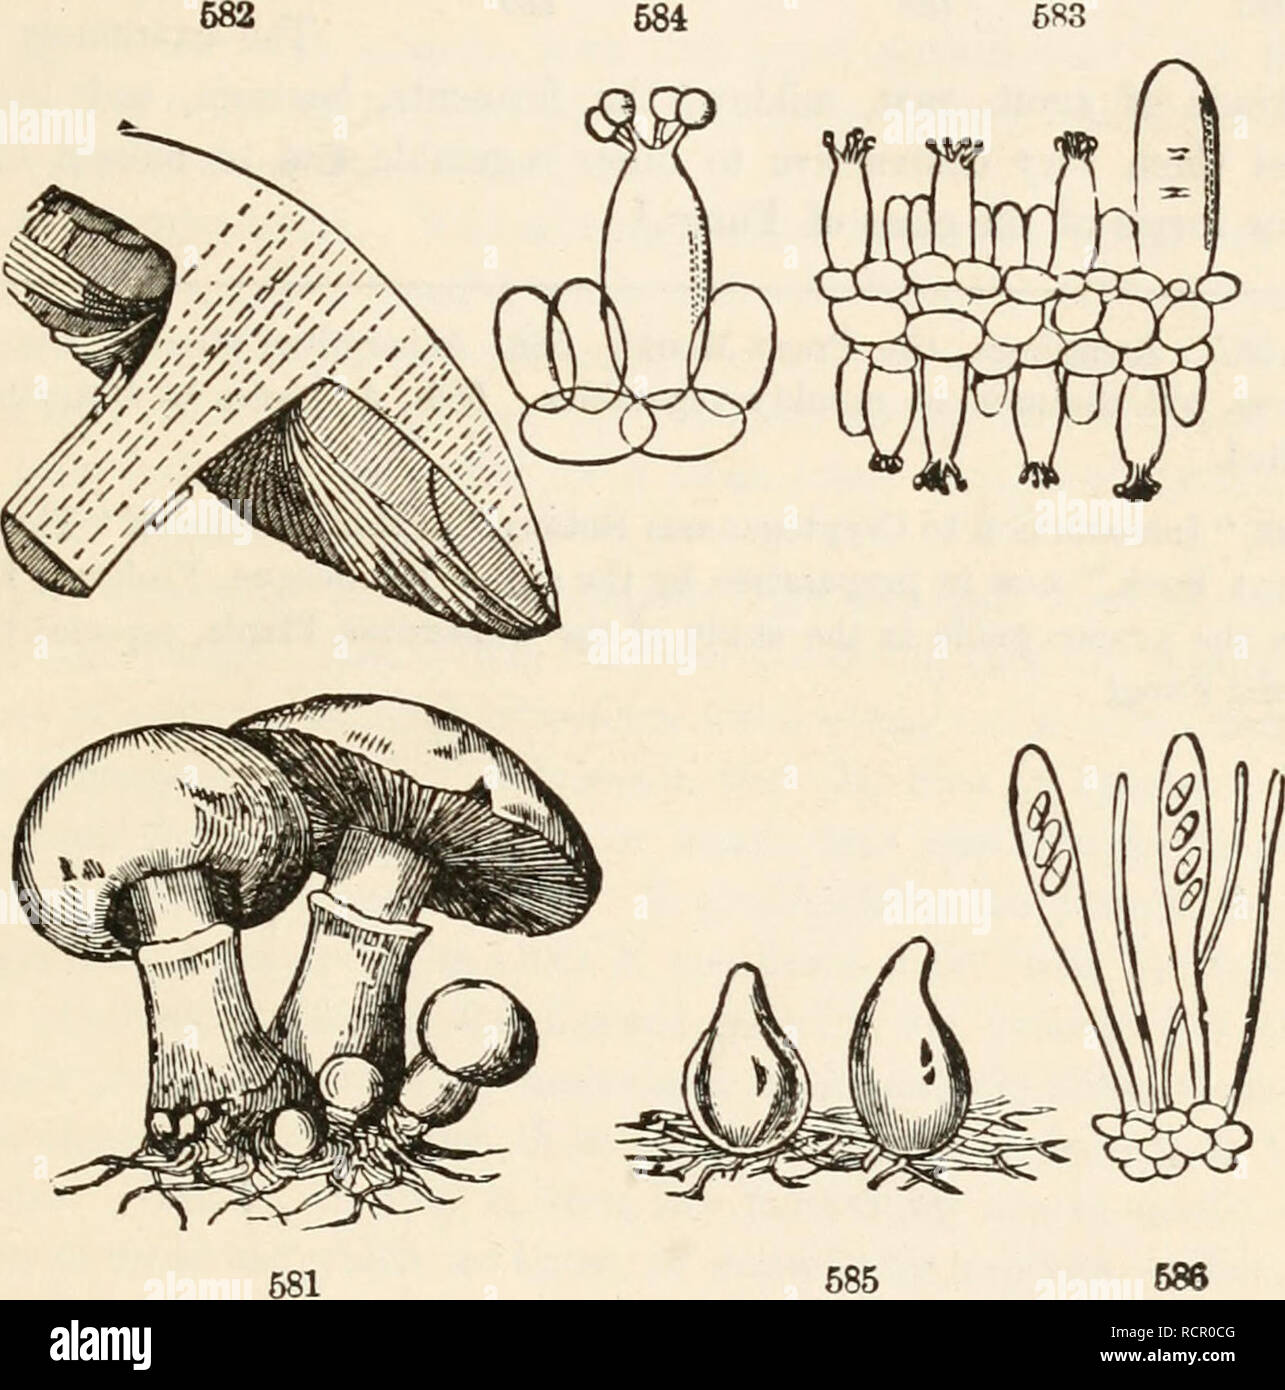 . The elements of botany for beginners and for schools. Botany. SECTION 17.] THALLOPHYTES. 173 cells lengthen and branch, growing by the absorption through their whole surface of the decaying, or organizable, or living matter which they feed upon. In a Mushroom (Agaricus), a knobby mass is at length formed, which develops into a stout stalk (^Stipe), bearing the cap {Pileus) -. the under side of the cap is covered by the Hymenium, in this genus consisting of radiating plates, the gills or Lamellee; and these bear the powdery spores in immense numbers. Under the microscope, the gills are found  Stock Photo